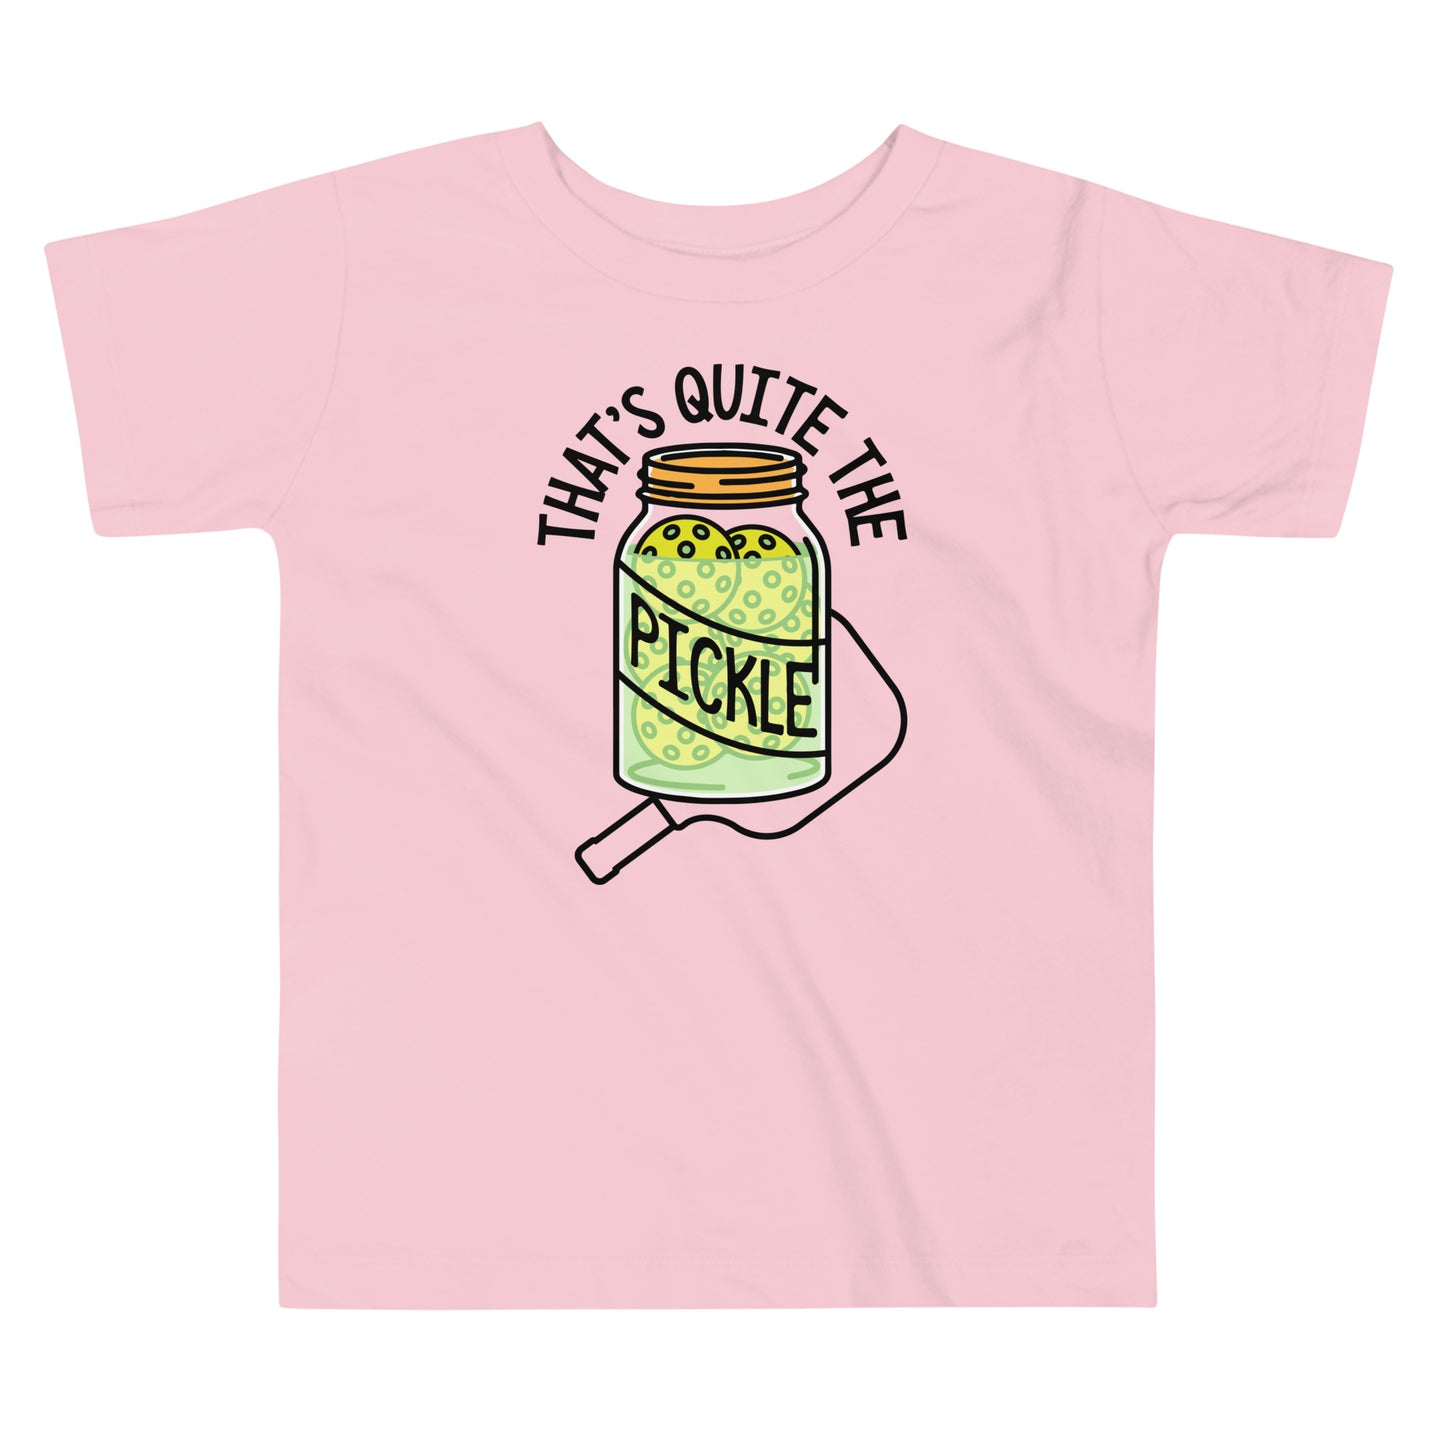 That's Quite The Pickle Kid's Toddler Tee